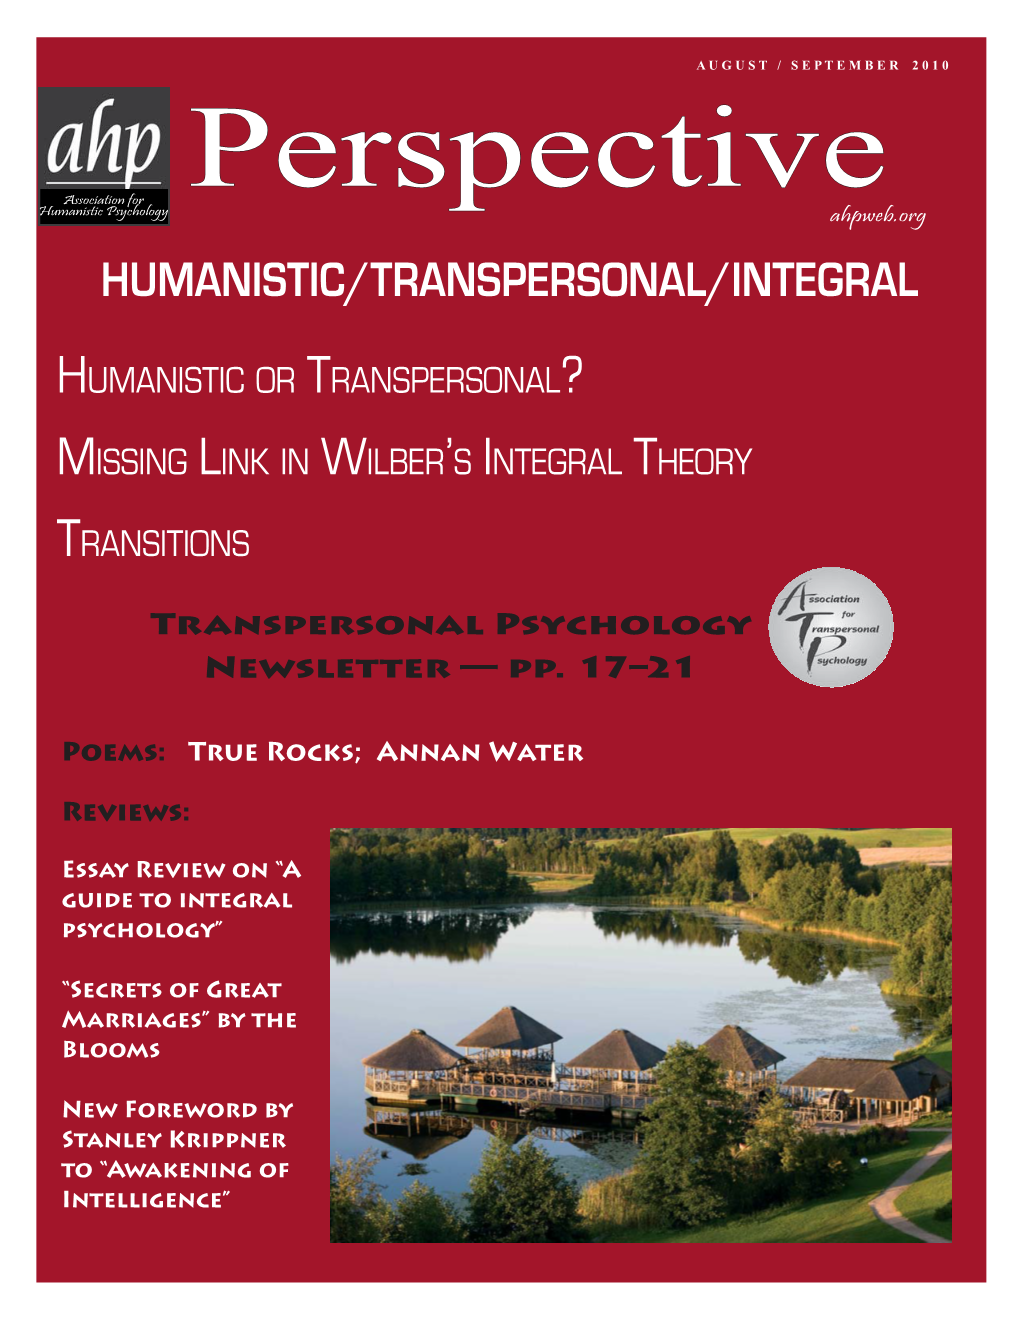 AHP Perspective AUGUST 2010.Indd